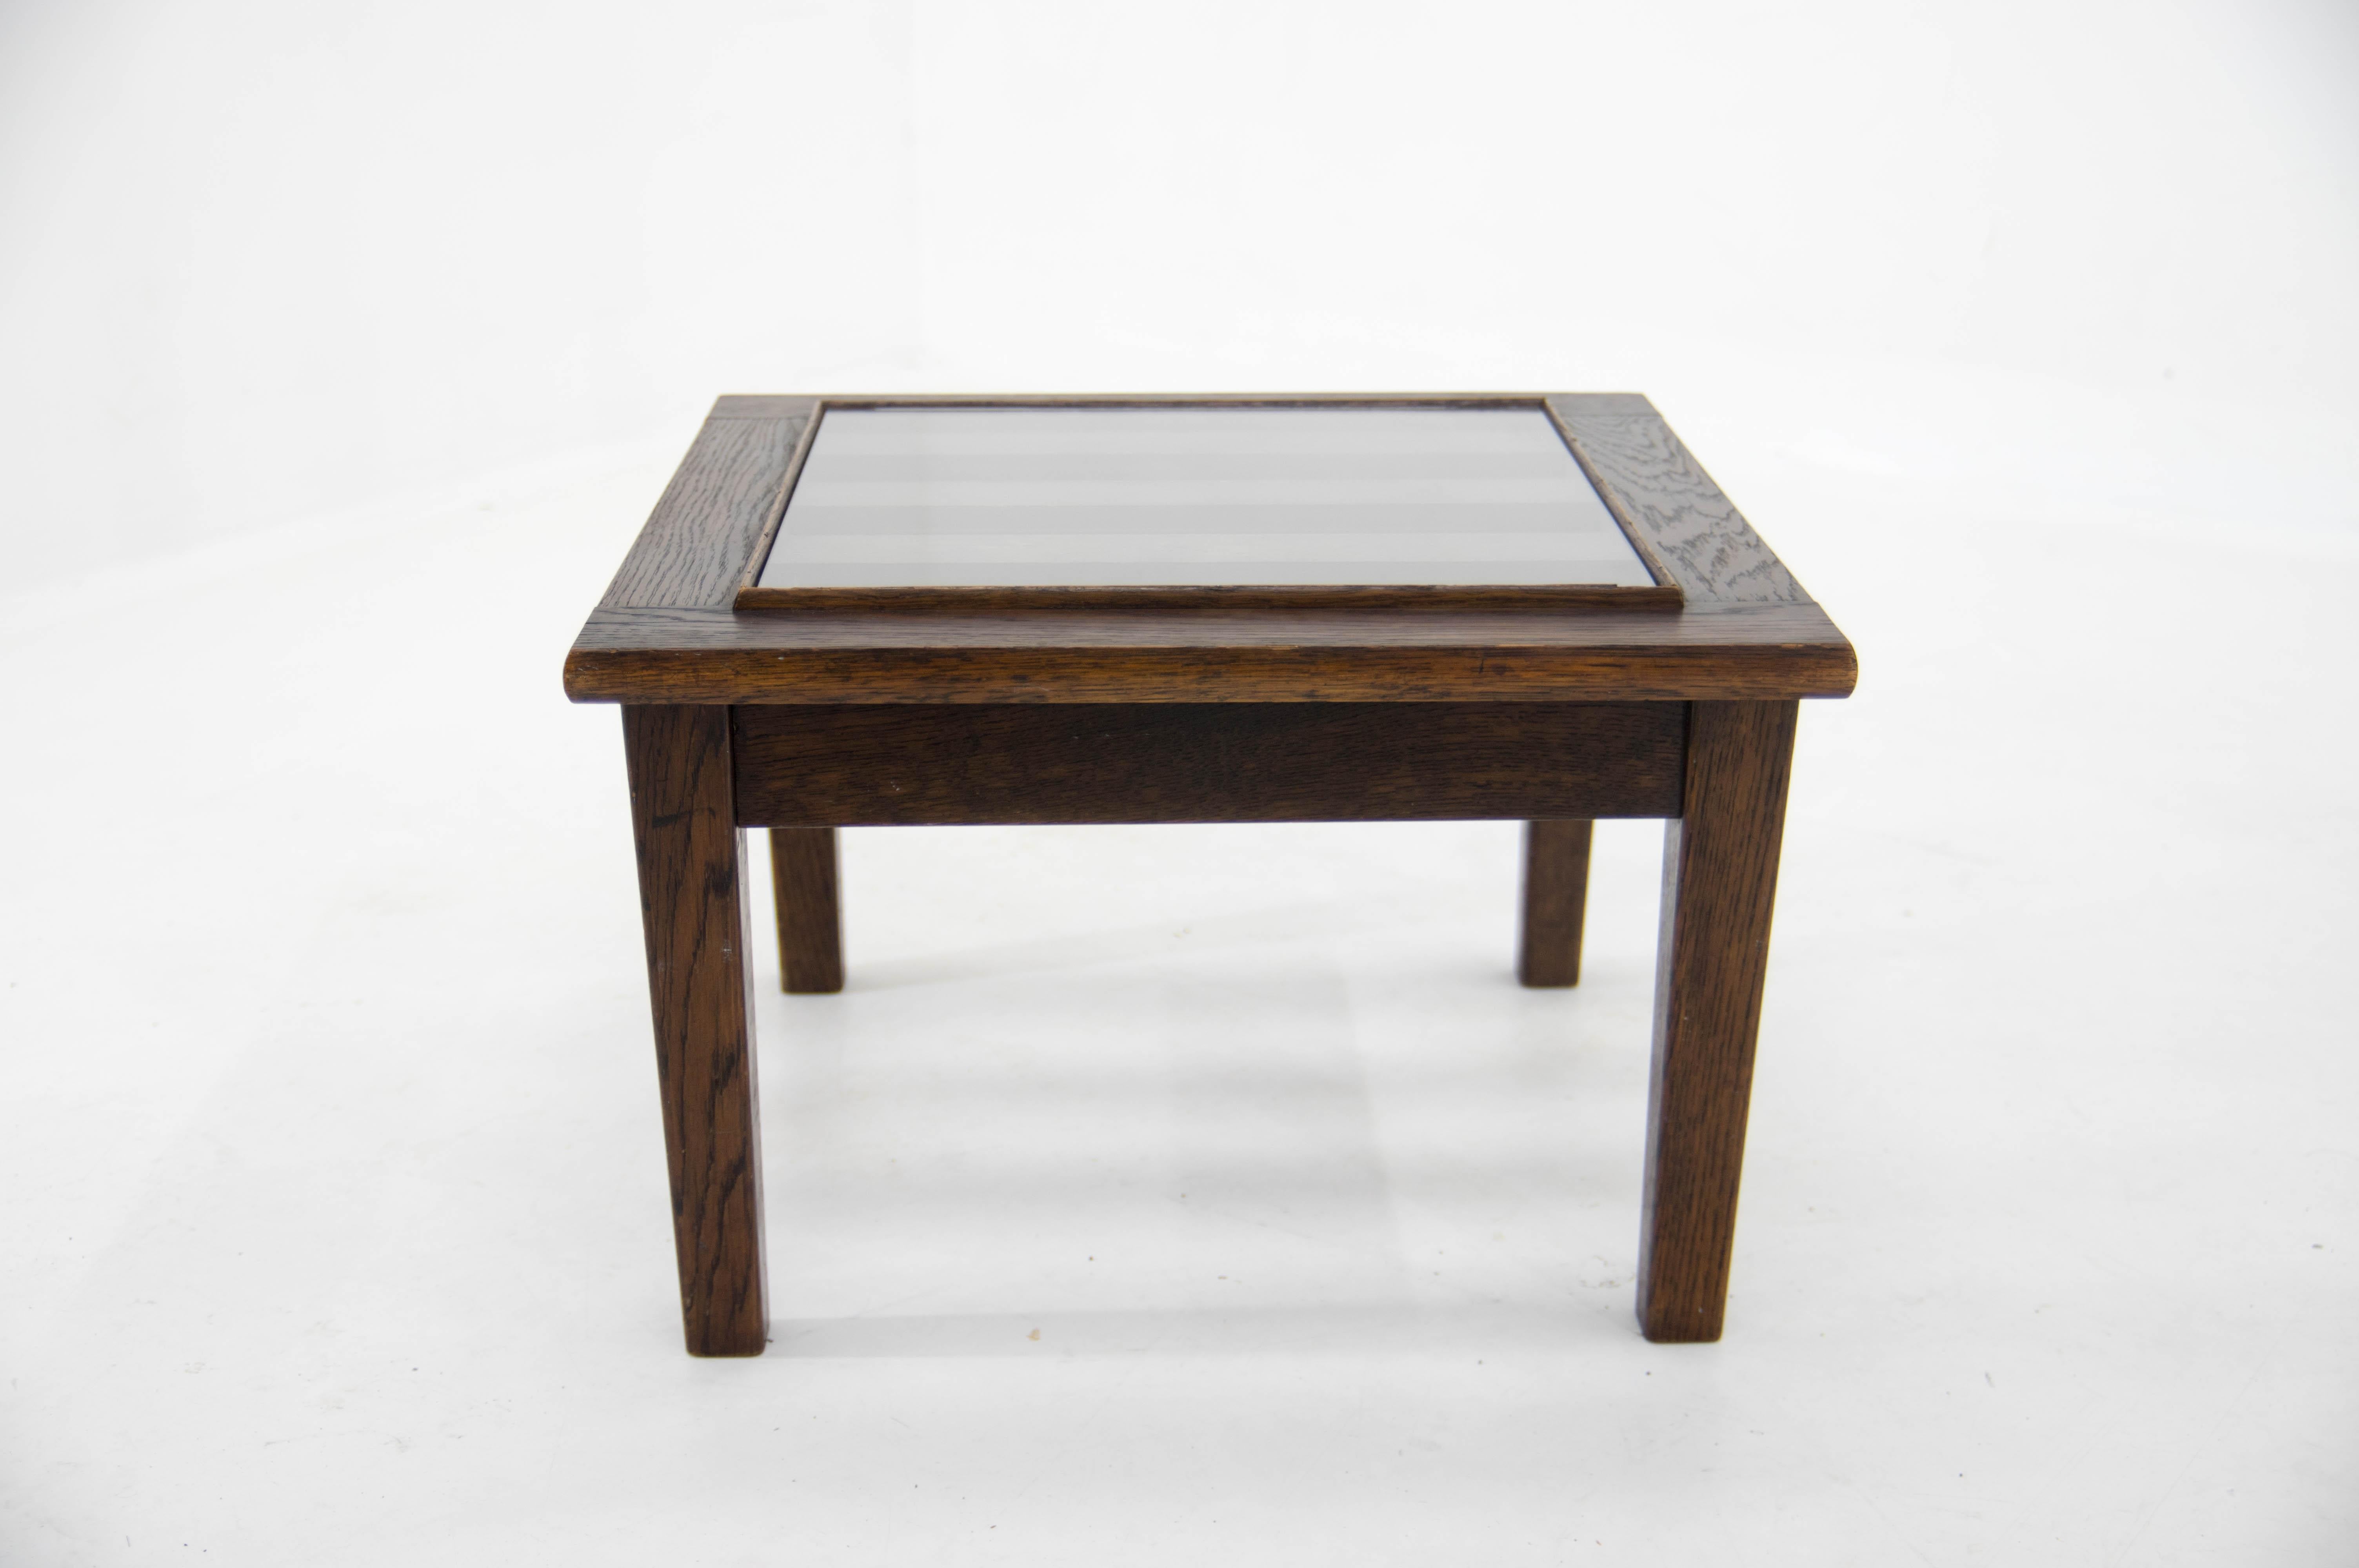 Antonín Heythum was a renowned architect who made a name for himself not only in Czechoslovakia but also in America, where he worked as a professor of industrial design at Columbia University.
This side table is a clear example of his functionalist